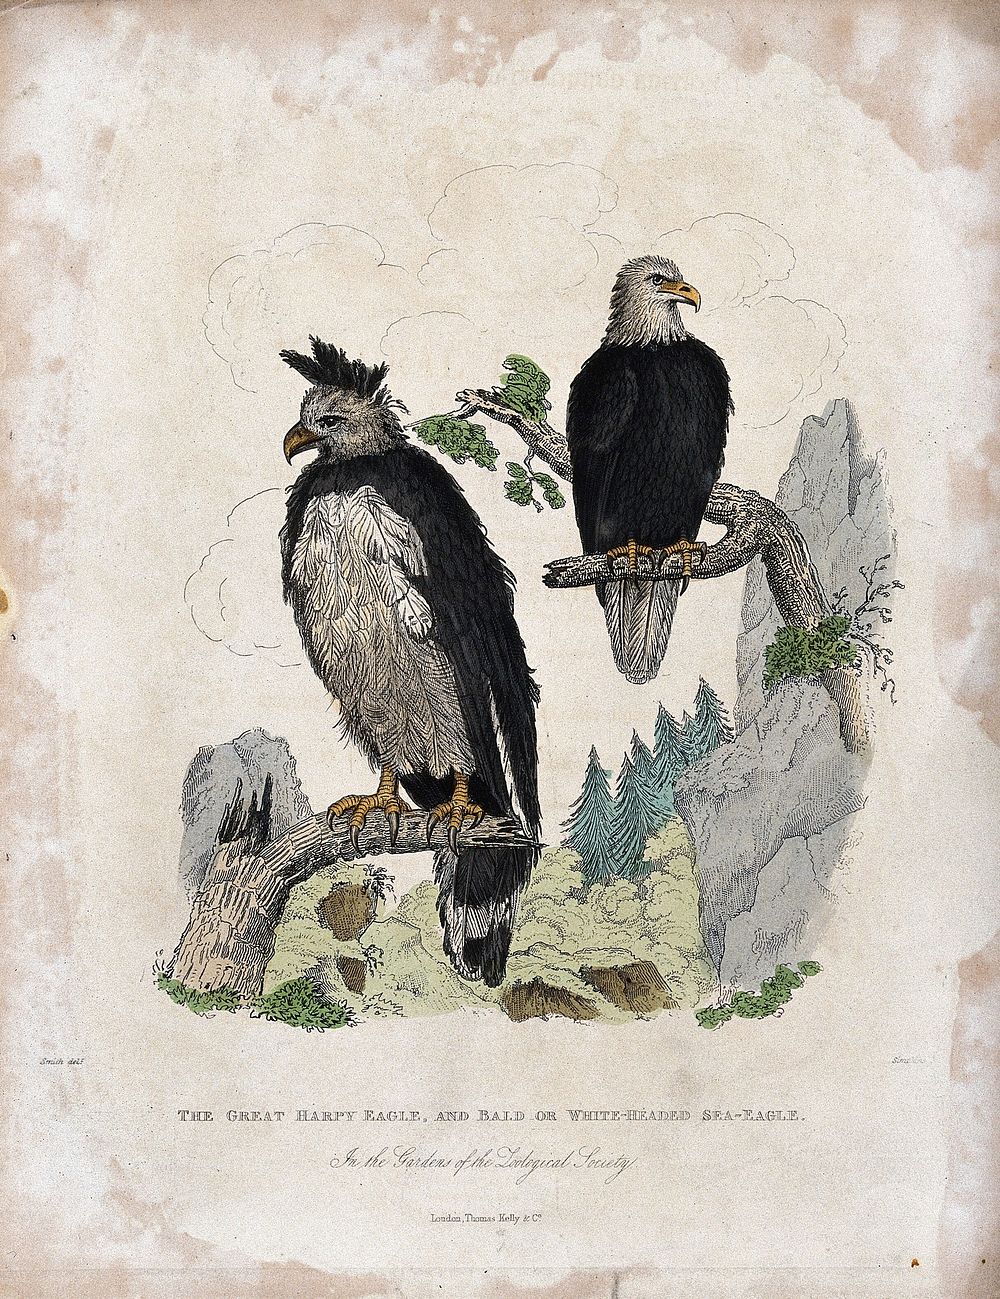 Zoological Society of London: A harpy eagle and a white-headed sea eagle. Coloured etching by Simpkins after H. Smith.